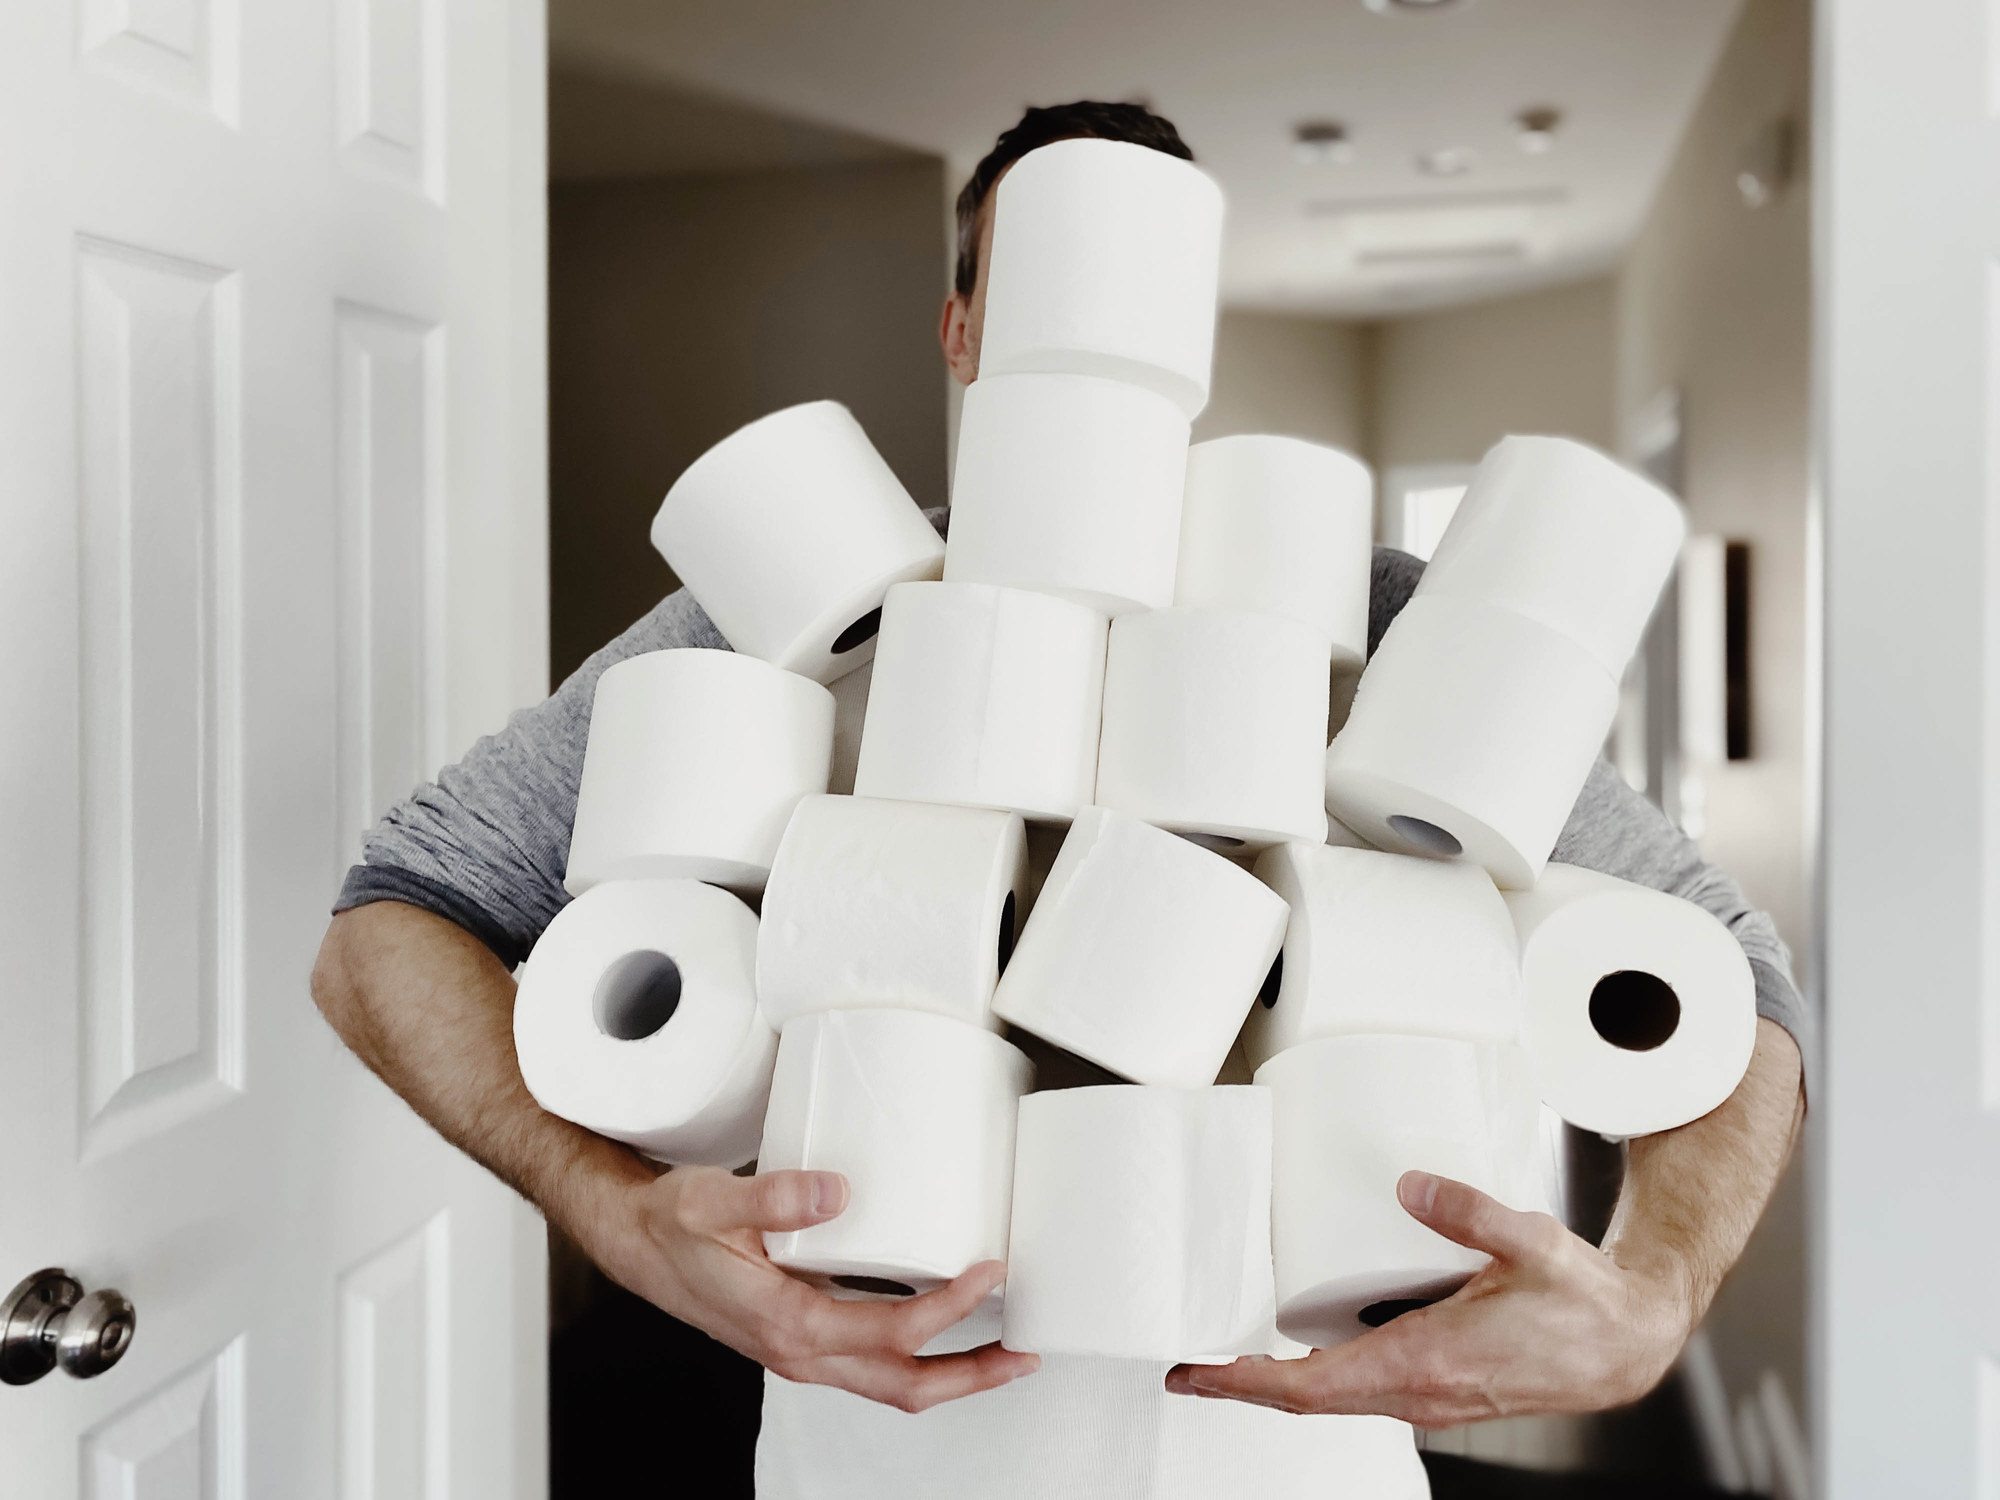 A man holding many rolls of toilet paper.